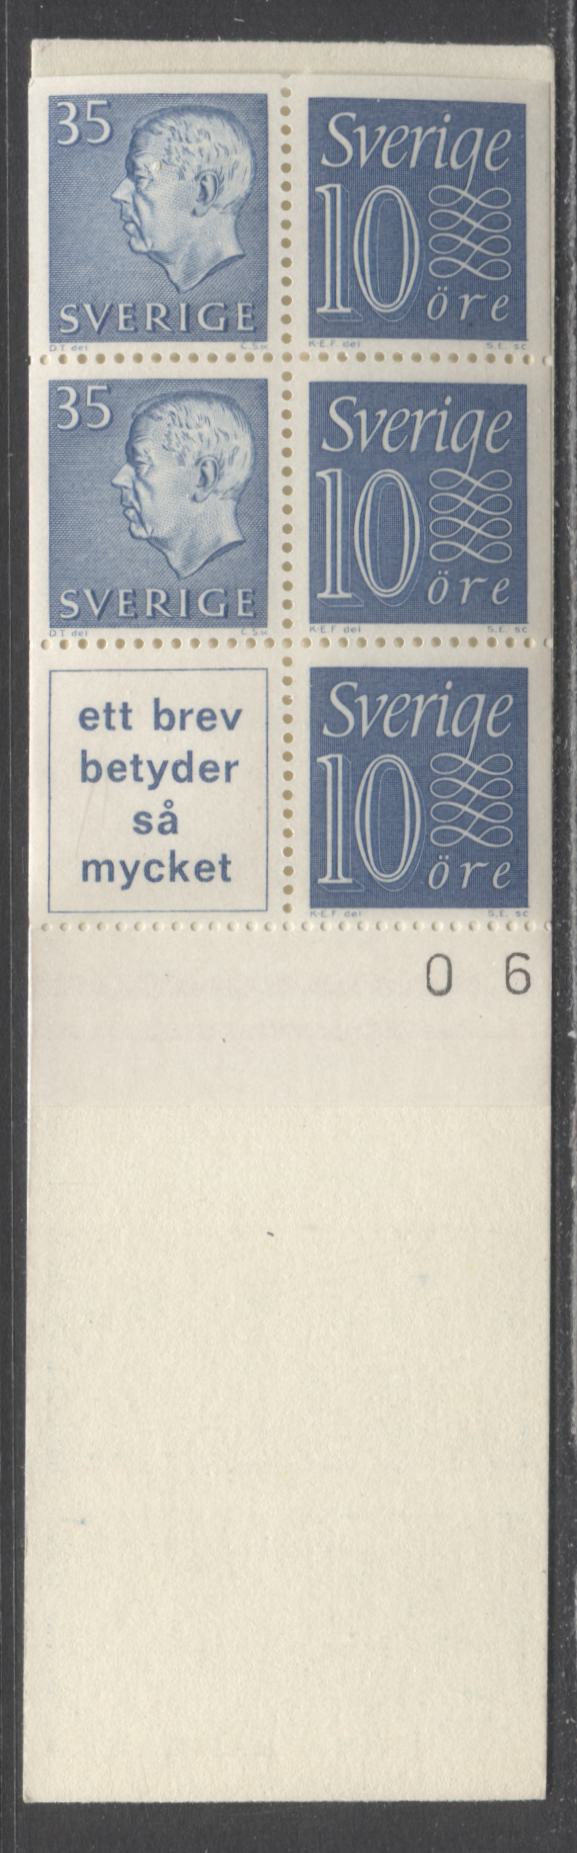 Lot 173 Sweden SC#586c (Facit #HA11BOH) 1963 Re-Engraved King Gustav VI Adolf Definitive Issue, With Inscribed Label, Inverted Pane, 10 Ore Stamps At Right, 2 Digits of Control Number on Tab, A VFNH Booklet of 6 (2 +3 + Label), Estimated Value $15